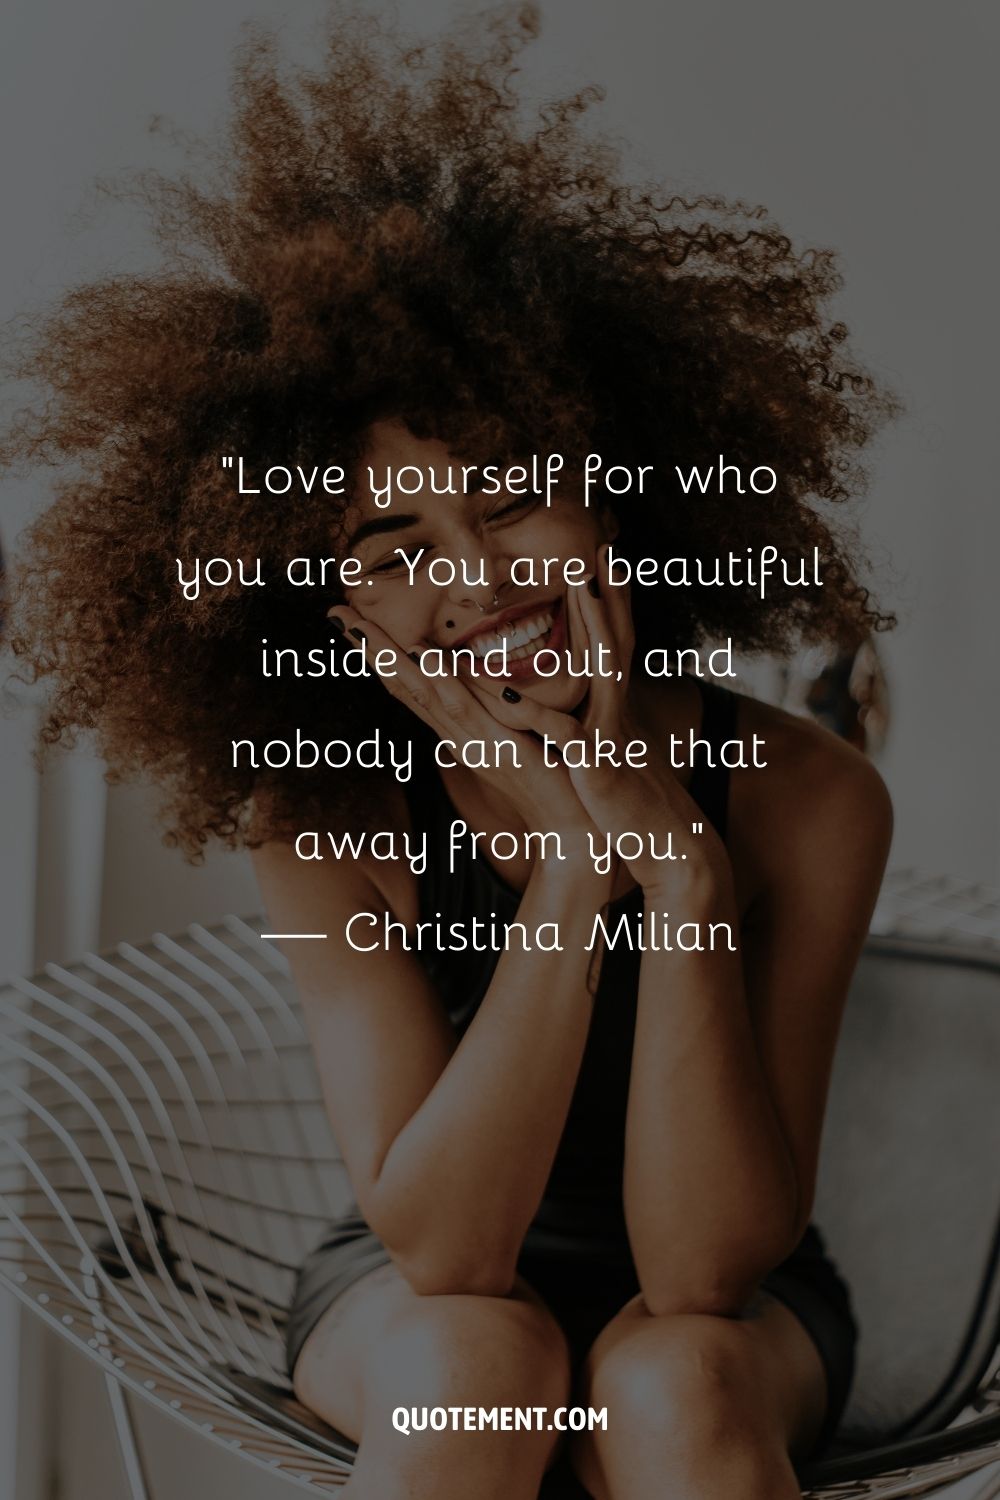 Love yourself for who you are. You are beautiful inside and out, and nobody can take that away from you. — Christina Milian